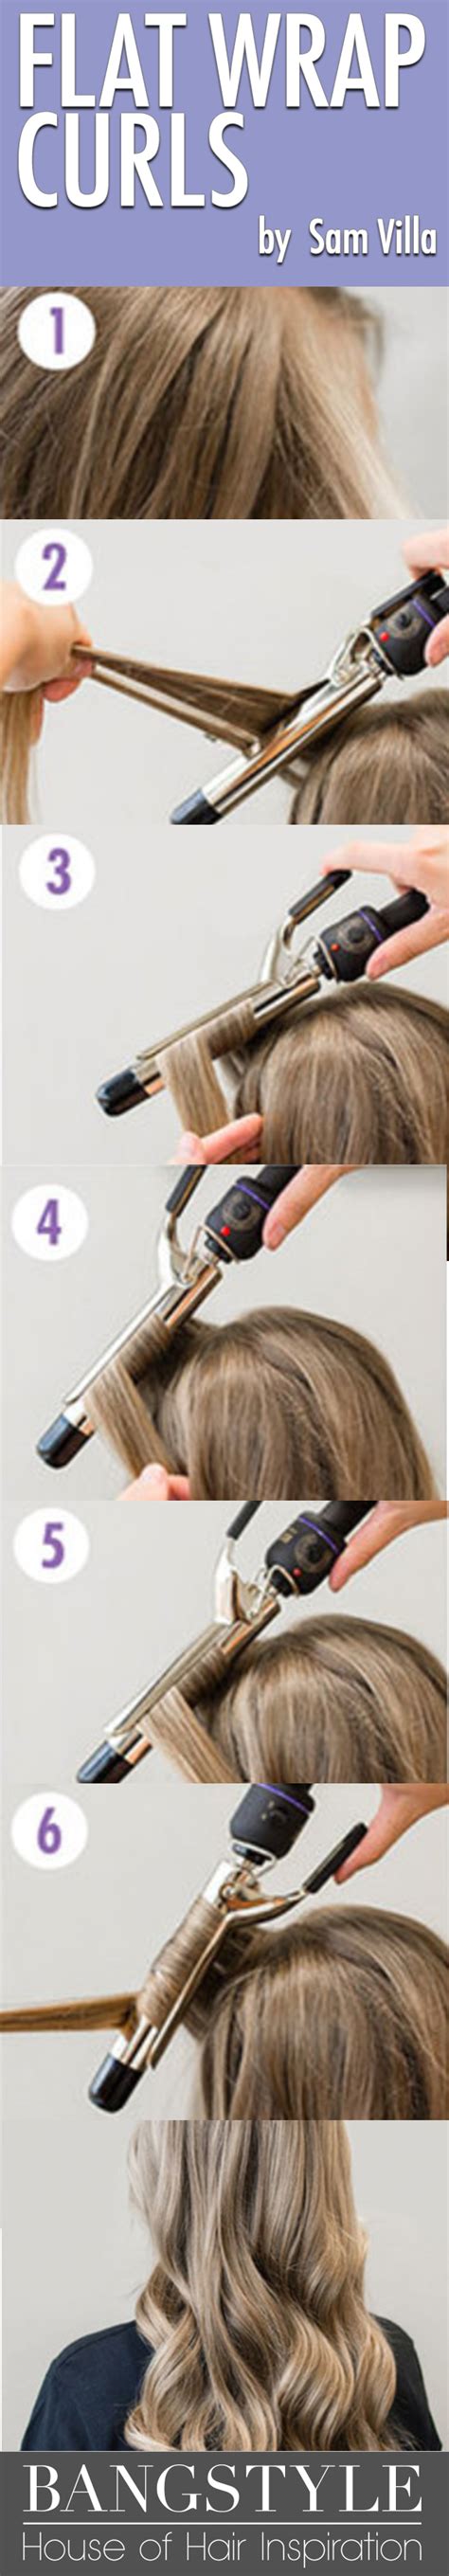 How To Curl Your Hair 6 Different Ways To Do It Bangstyle How To Curl Your Hair Curls